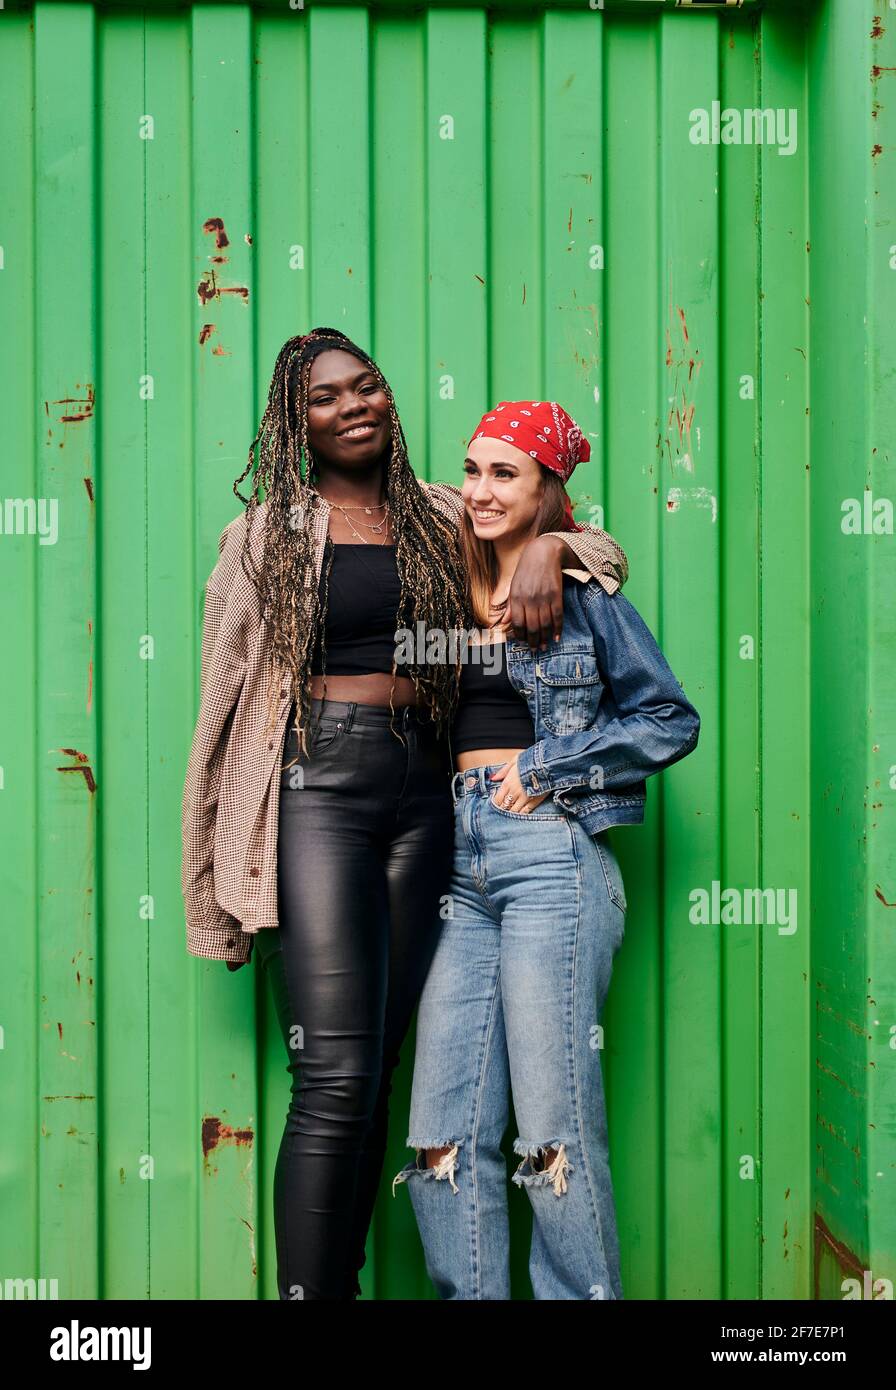 Two multiethnic women in urban clothing smile and hug each other Stock Photo